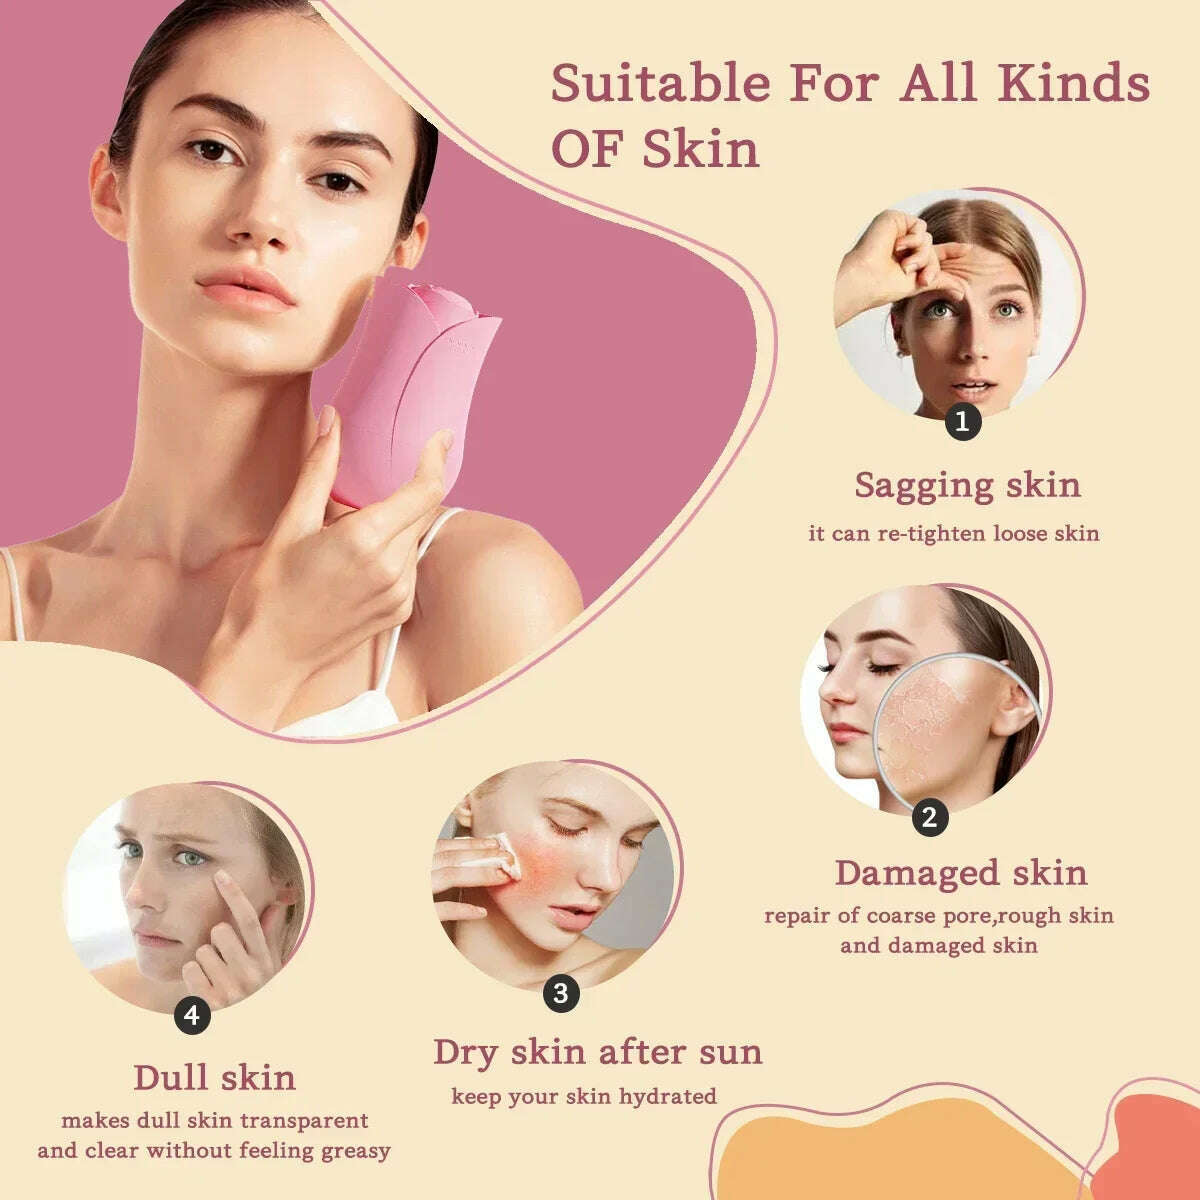 KIMLUD, Rose Shape Portable Ice Roller for Face Reusable Ice Face Massager for Eliminate Facial Puffiness In The Morning Easy To Use, KIMLUD Womens Clothes